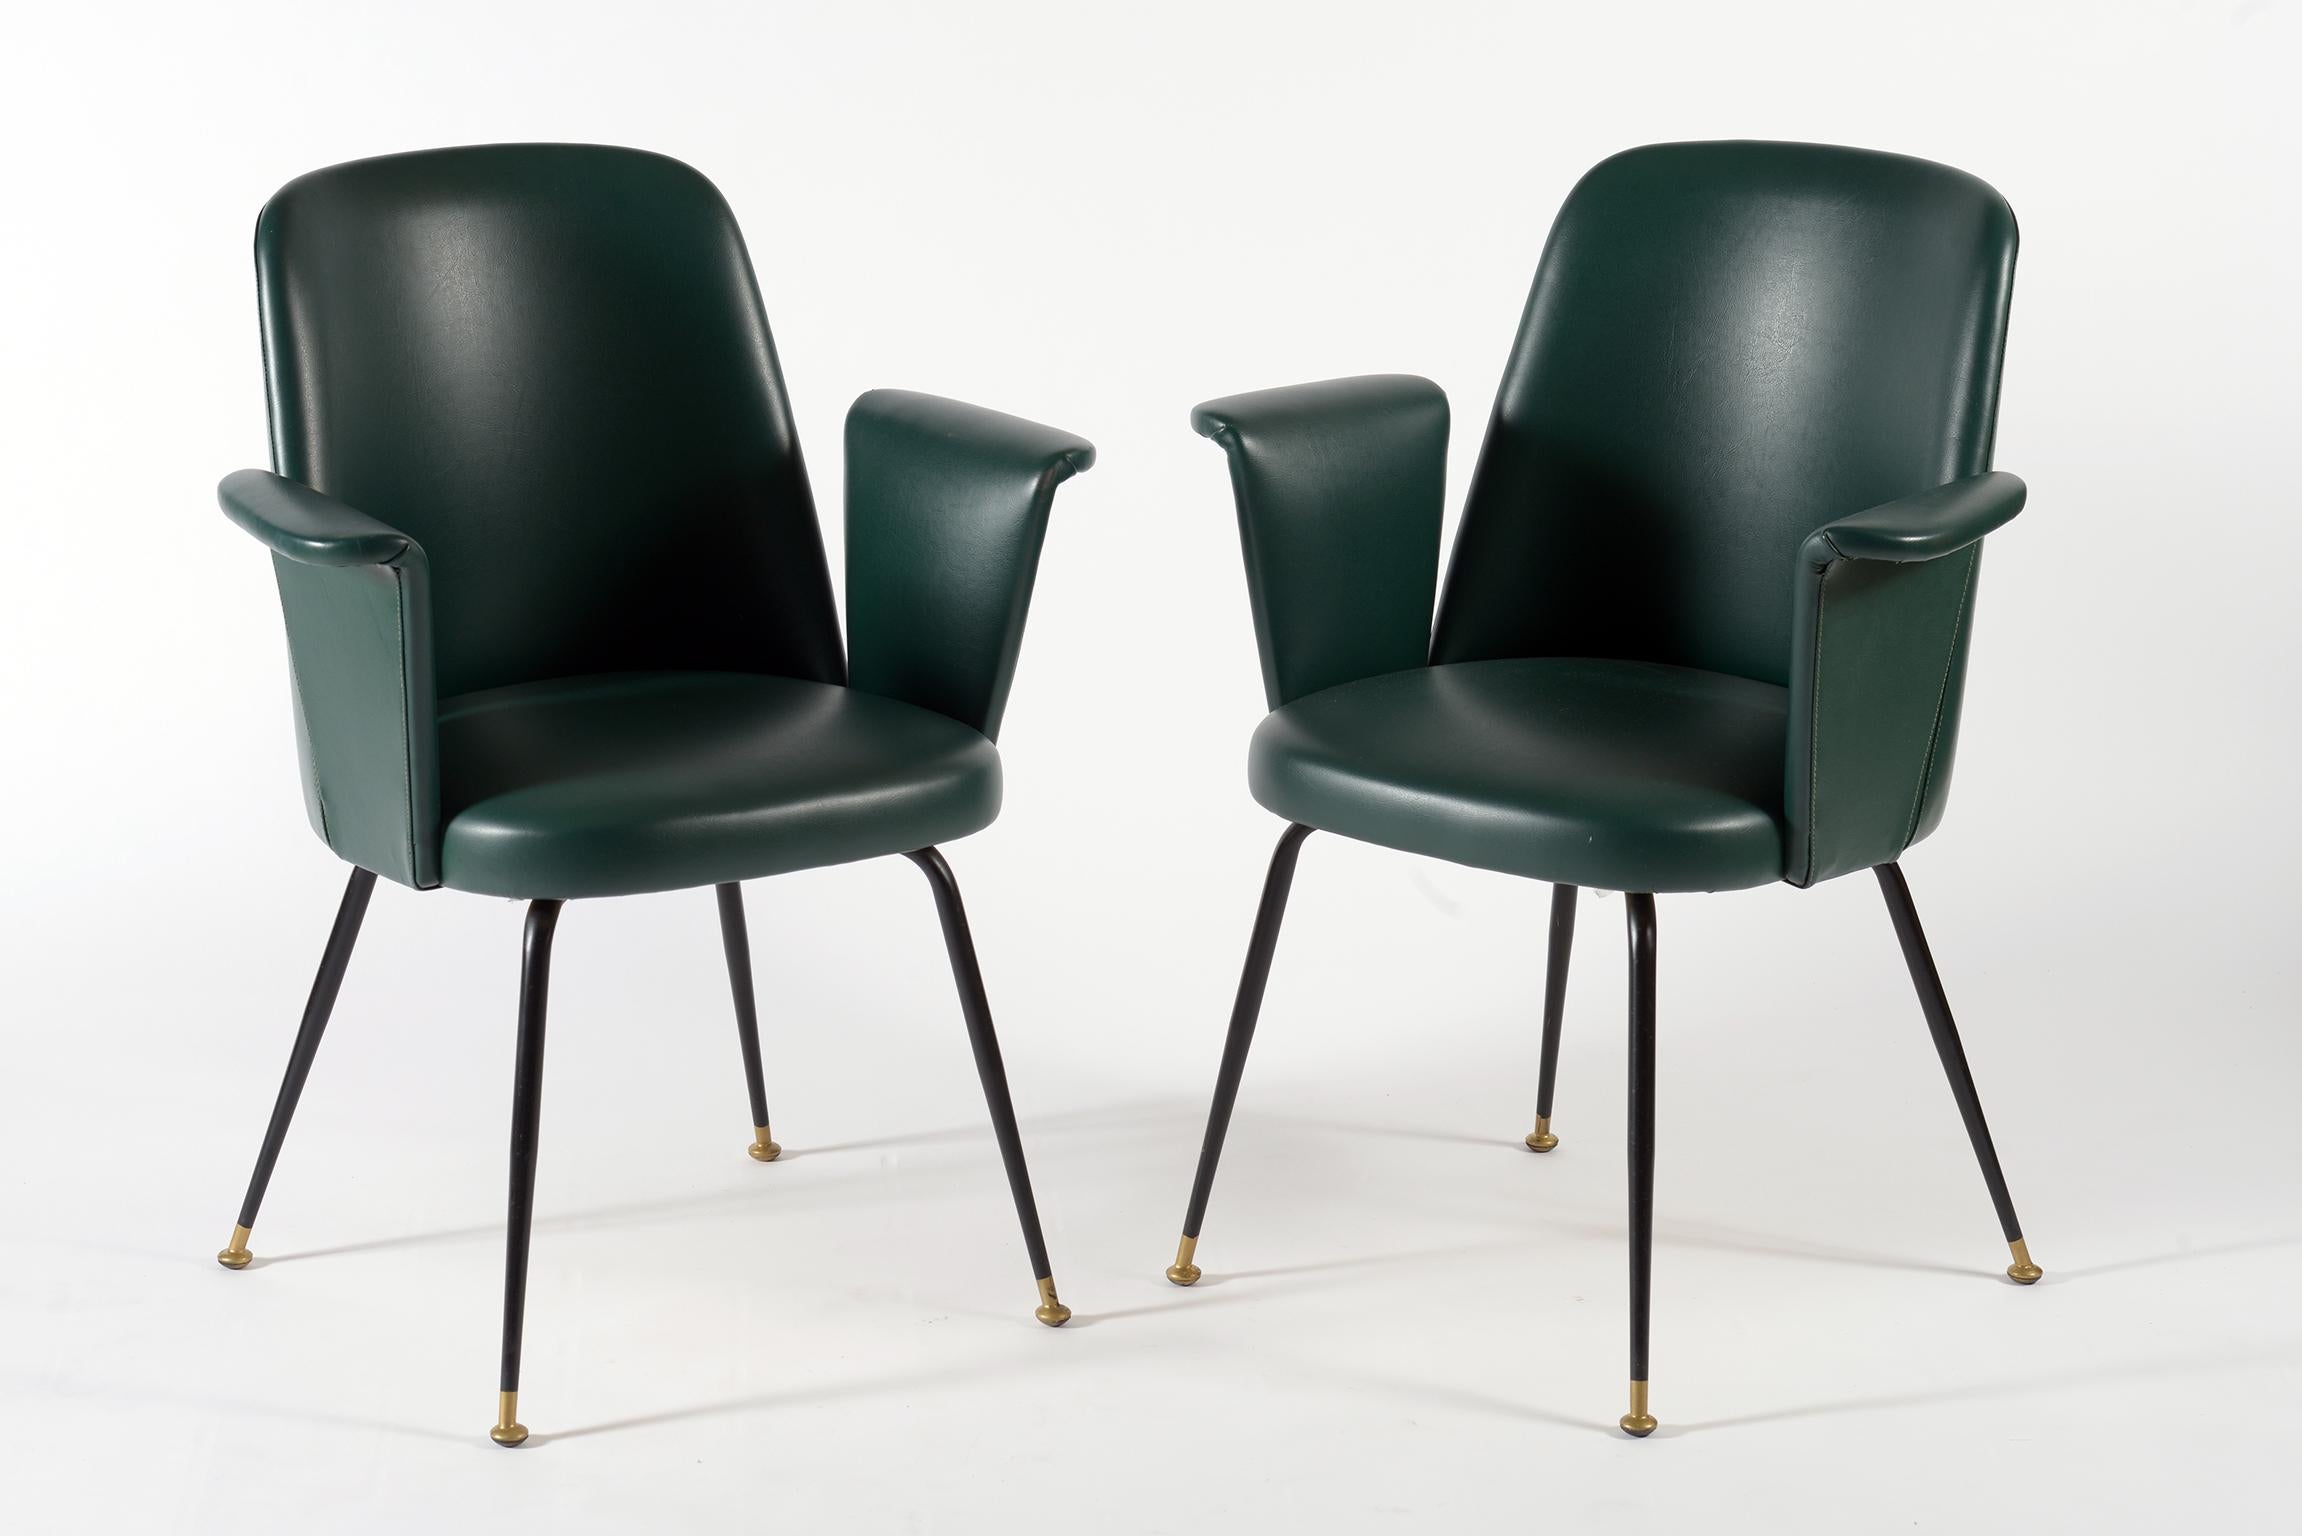 Pair of chair with armrest covered with original green leatherette from the 1950s, four slim natural and black lacquered brass legs.
Midcentury Italian.